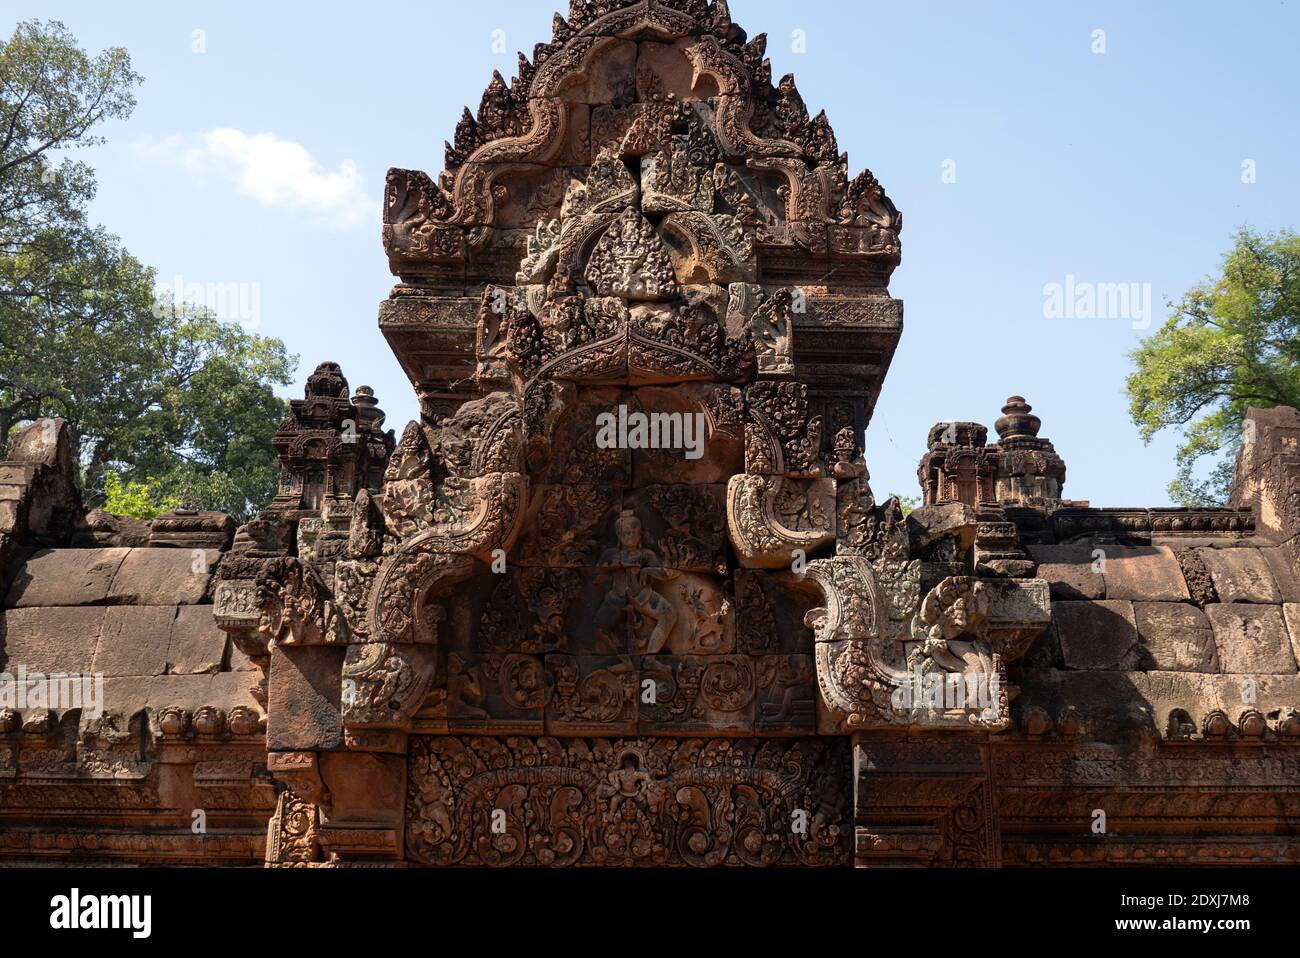 Bas-relief on the entrance of Banteay Srei Stock Photo